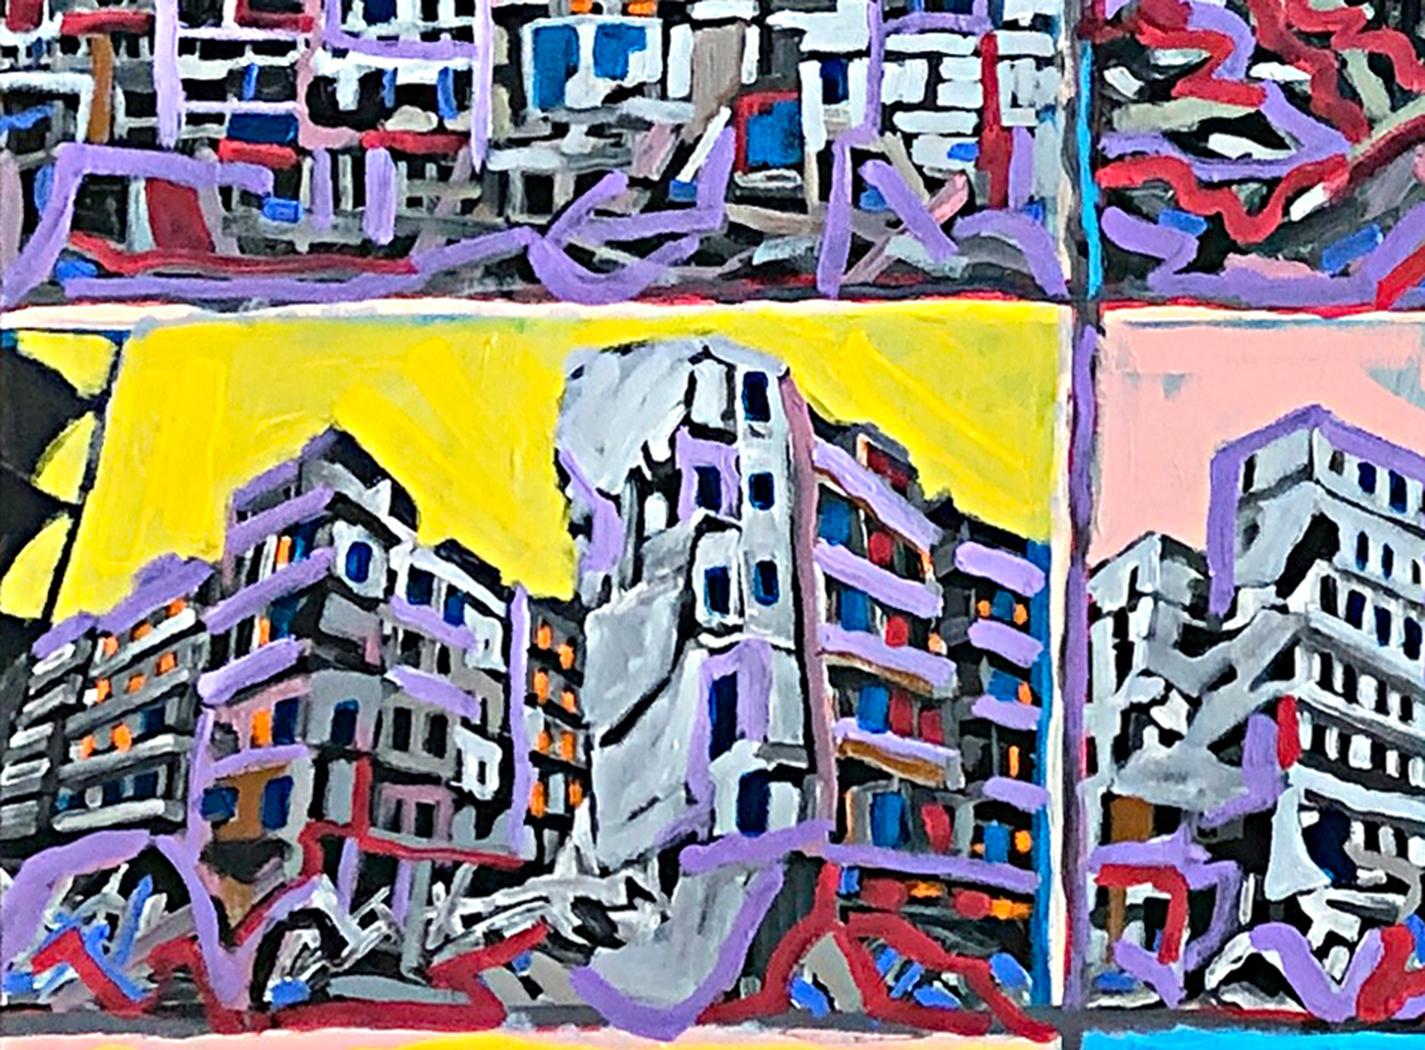 Aleppo to Kyiv Windows to the World - No.2 - Abstract Expressionist Painting by Tony Khawam